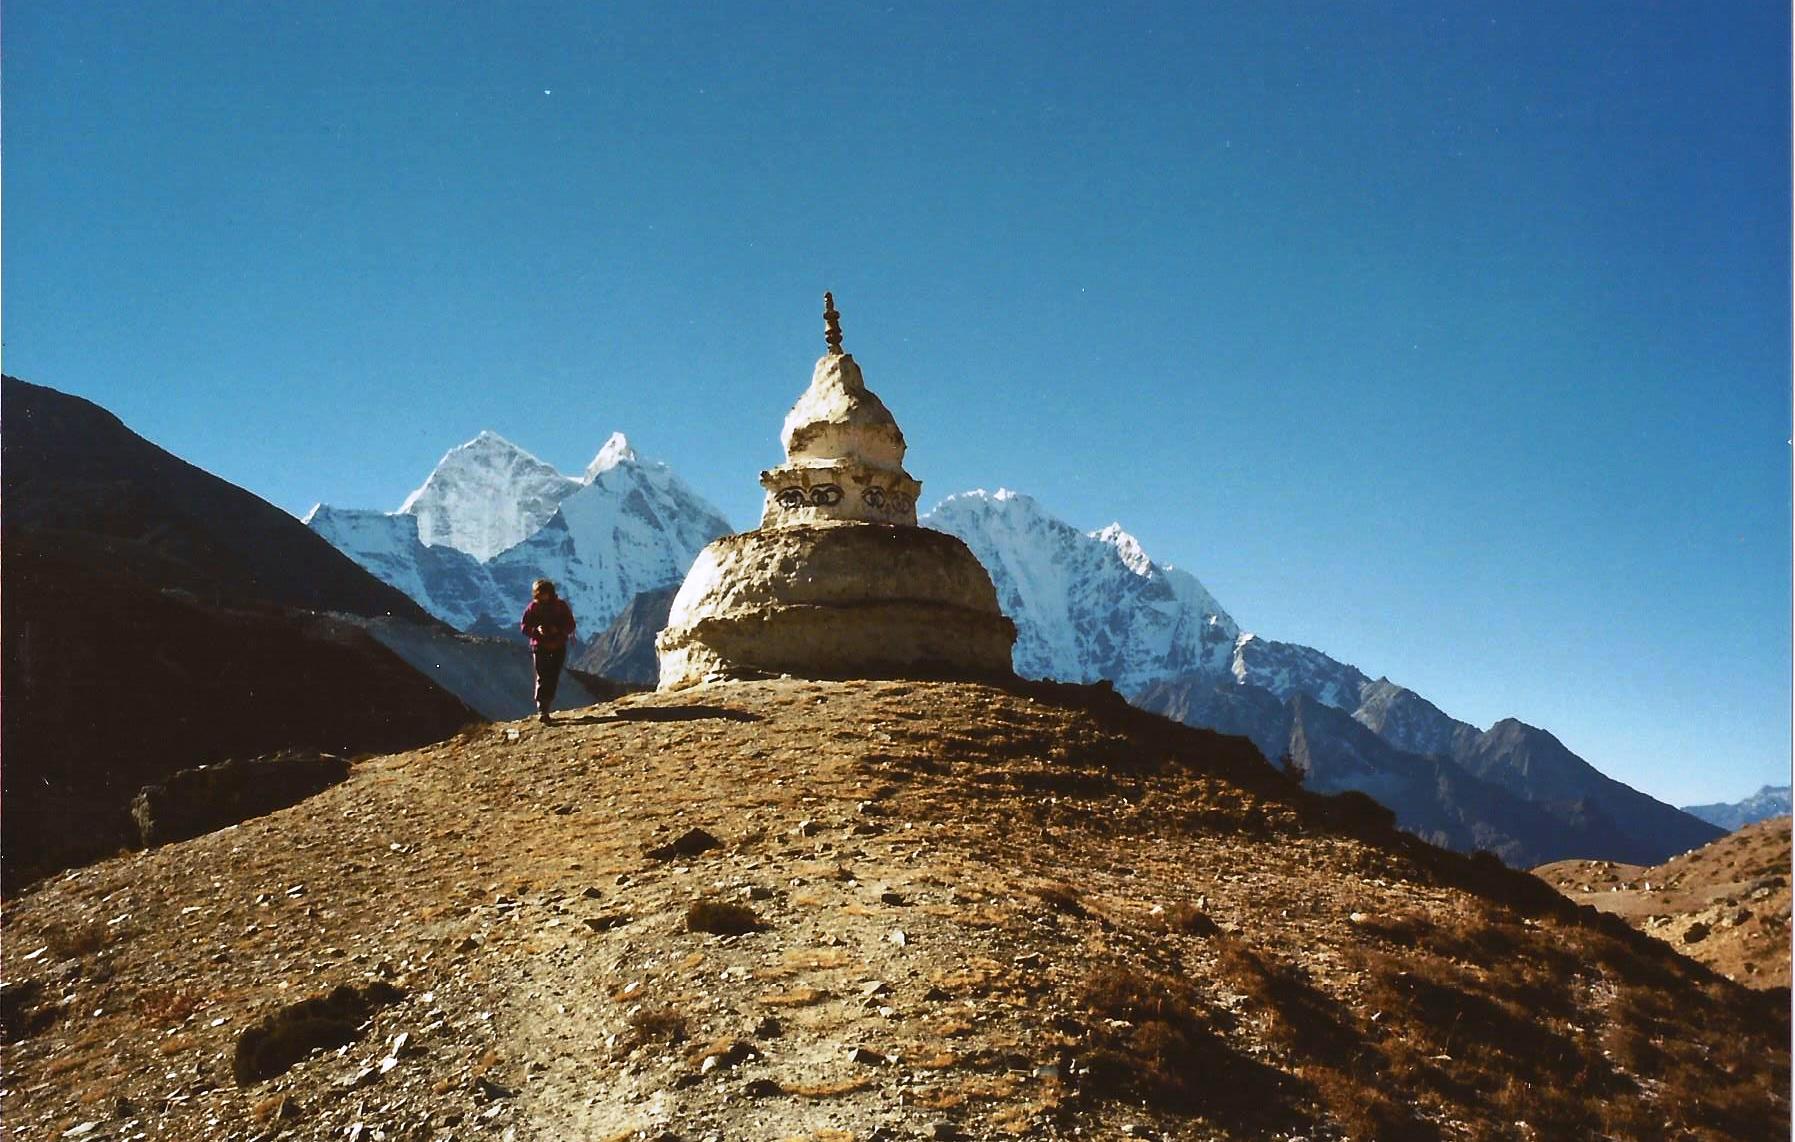 John Christian in Library Izola: FREE Lecture on Spiritual Meditation Treks in the Himalayas, 26th May 2015